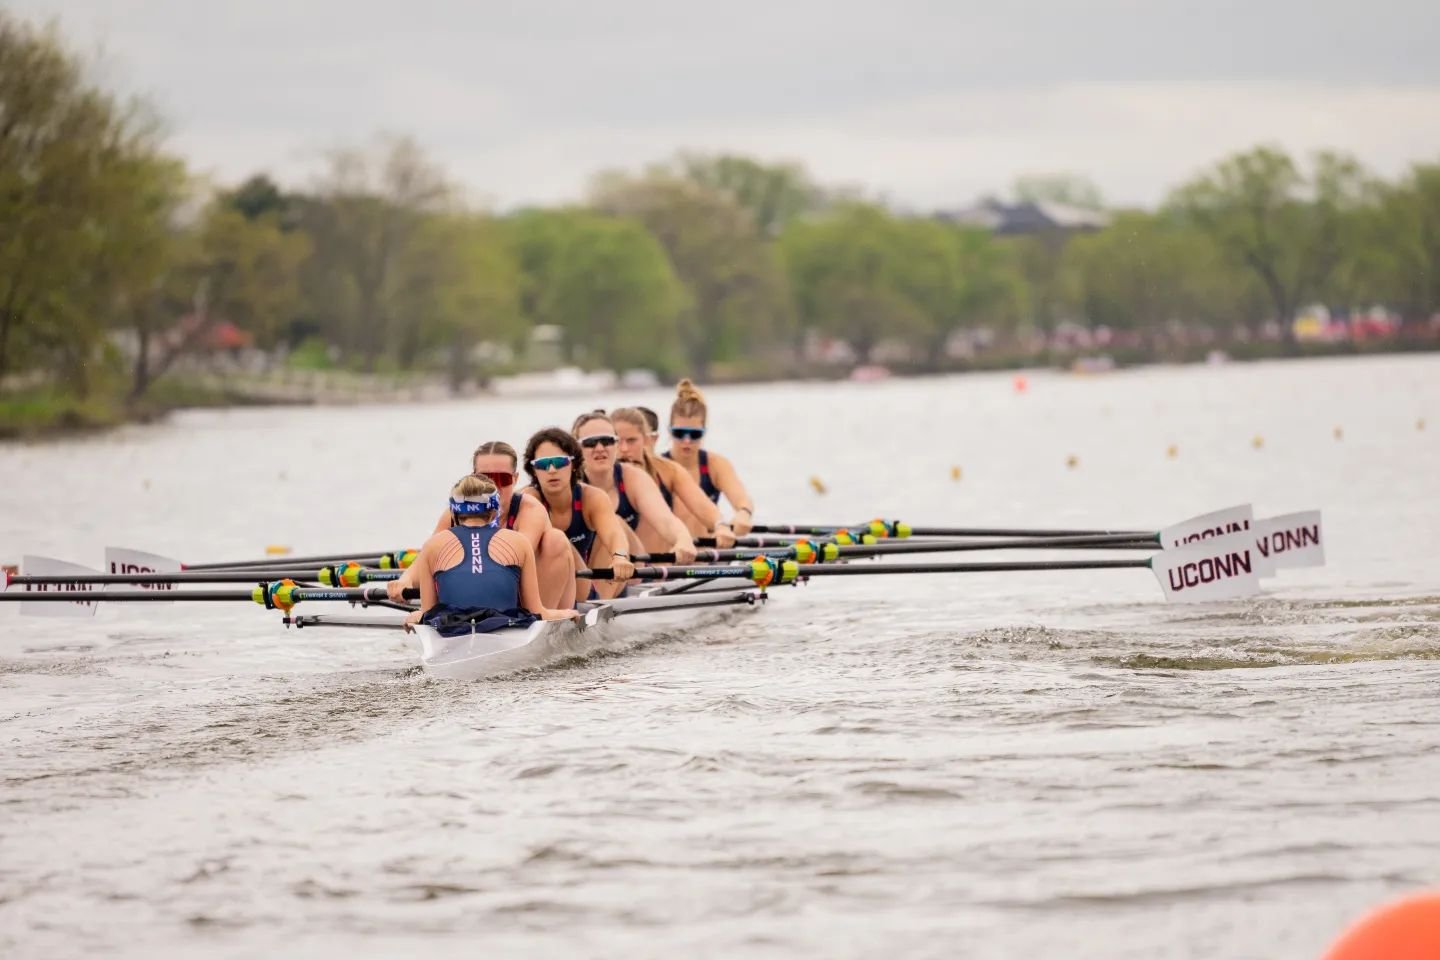 in honor of UConn winning the men's #marchmadness tournament, here are some photos I got of their #womensrowing team last spring at Knecht Cup
@uconnrowing 
.
.
#rowingphotographer #sportsphotographer #uconnrowing #phillyphotographer #rowerlife #row2